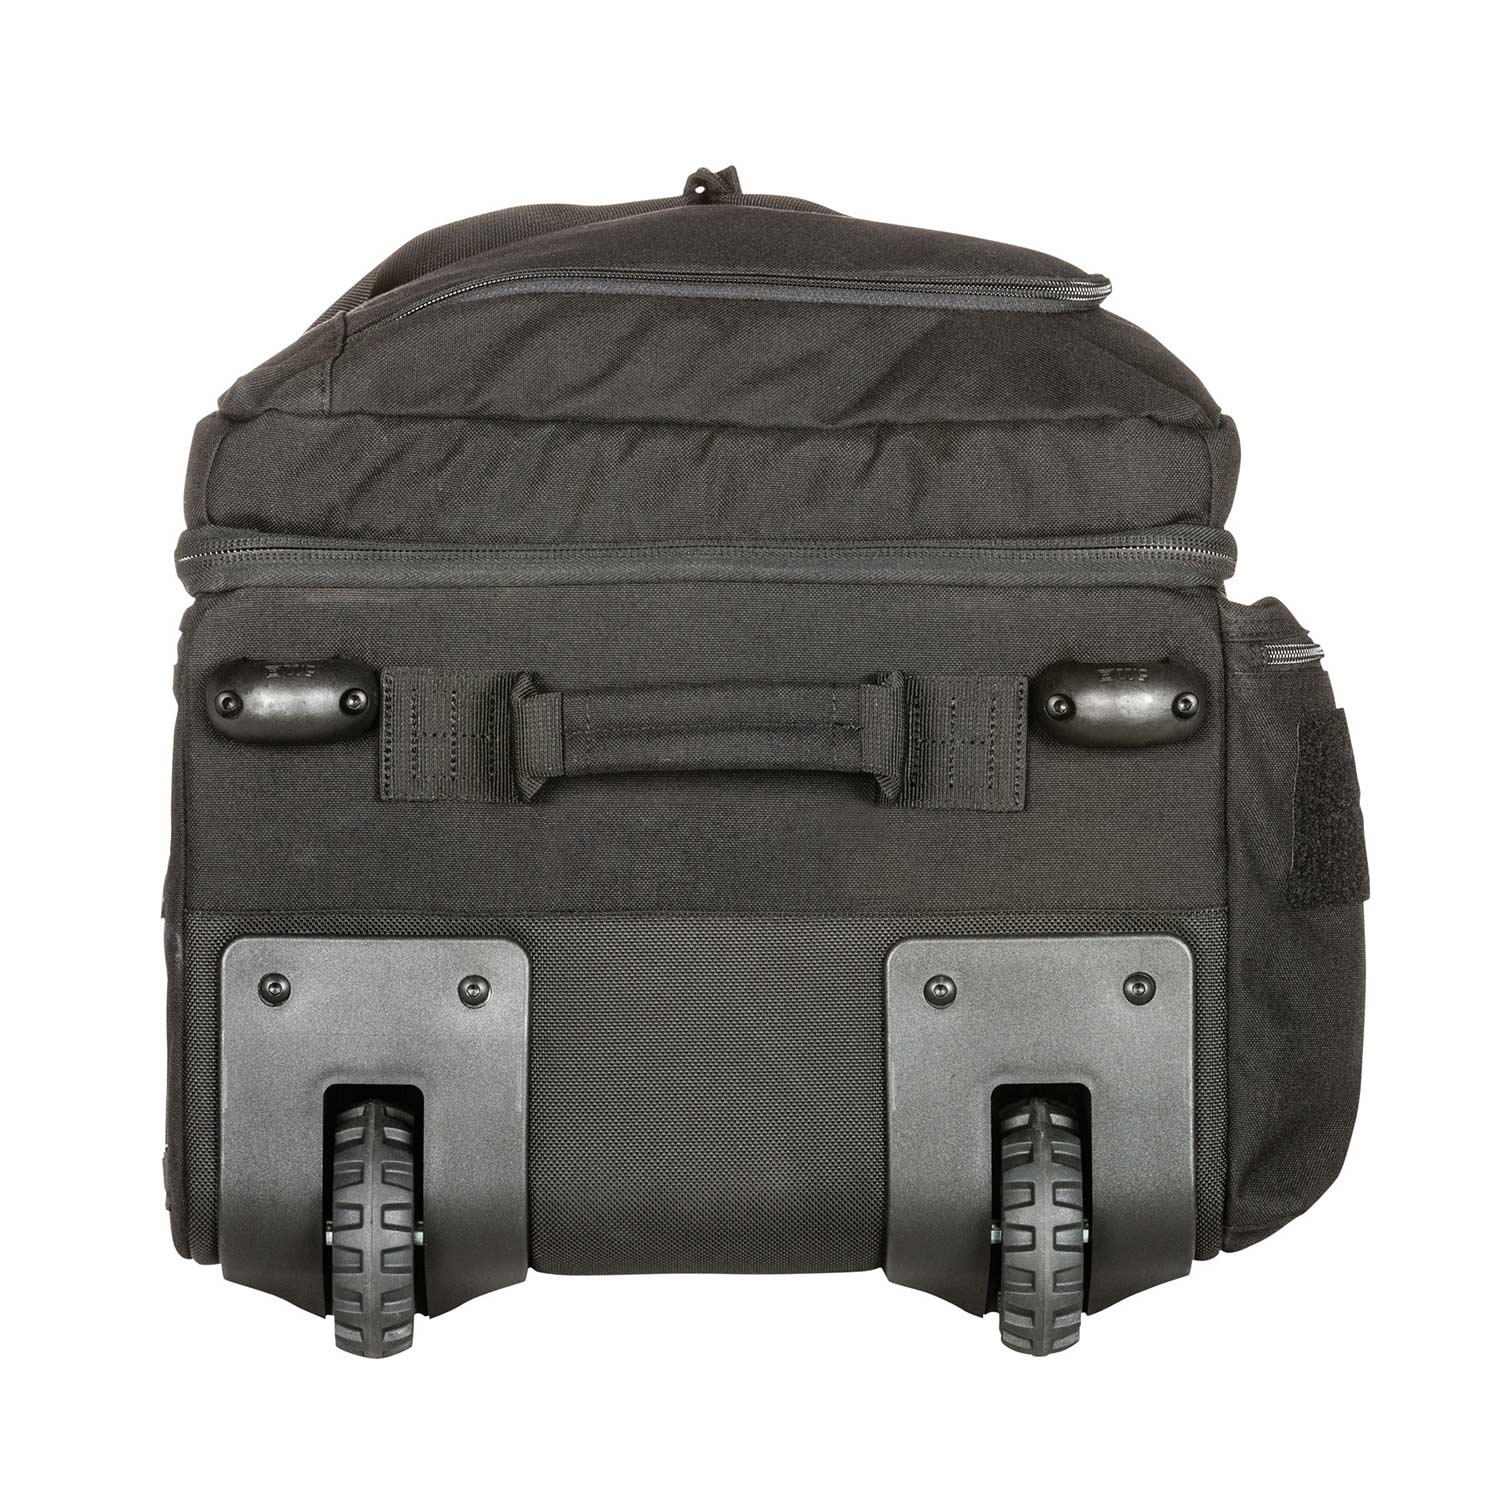 5.11 TACTICAL MISSION READY 3.0 ROLLING DUFFEL BAG